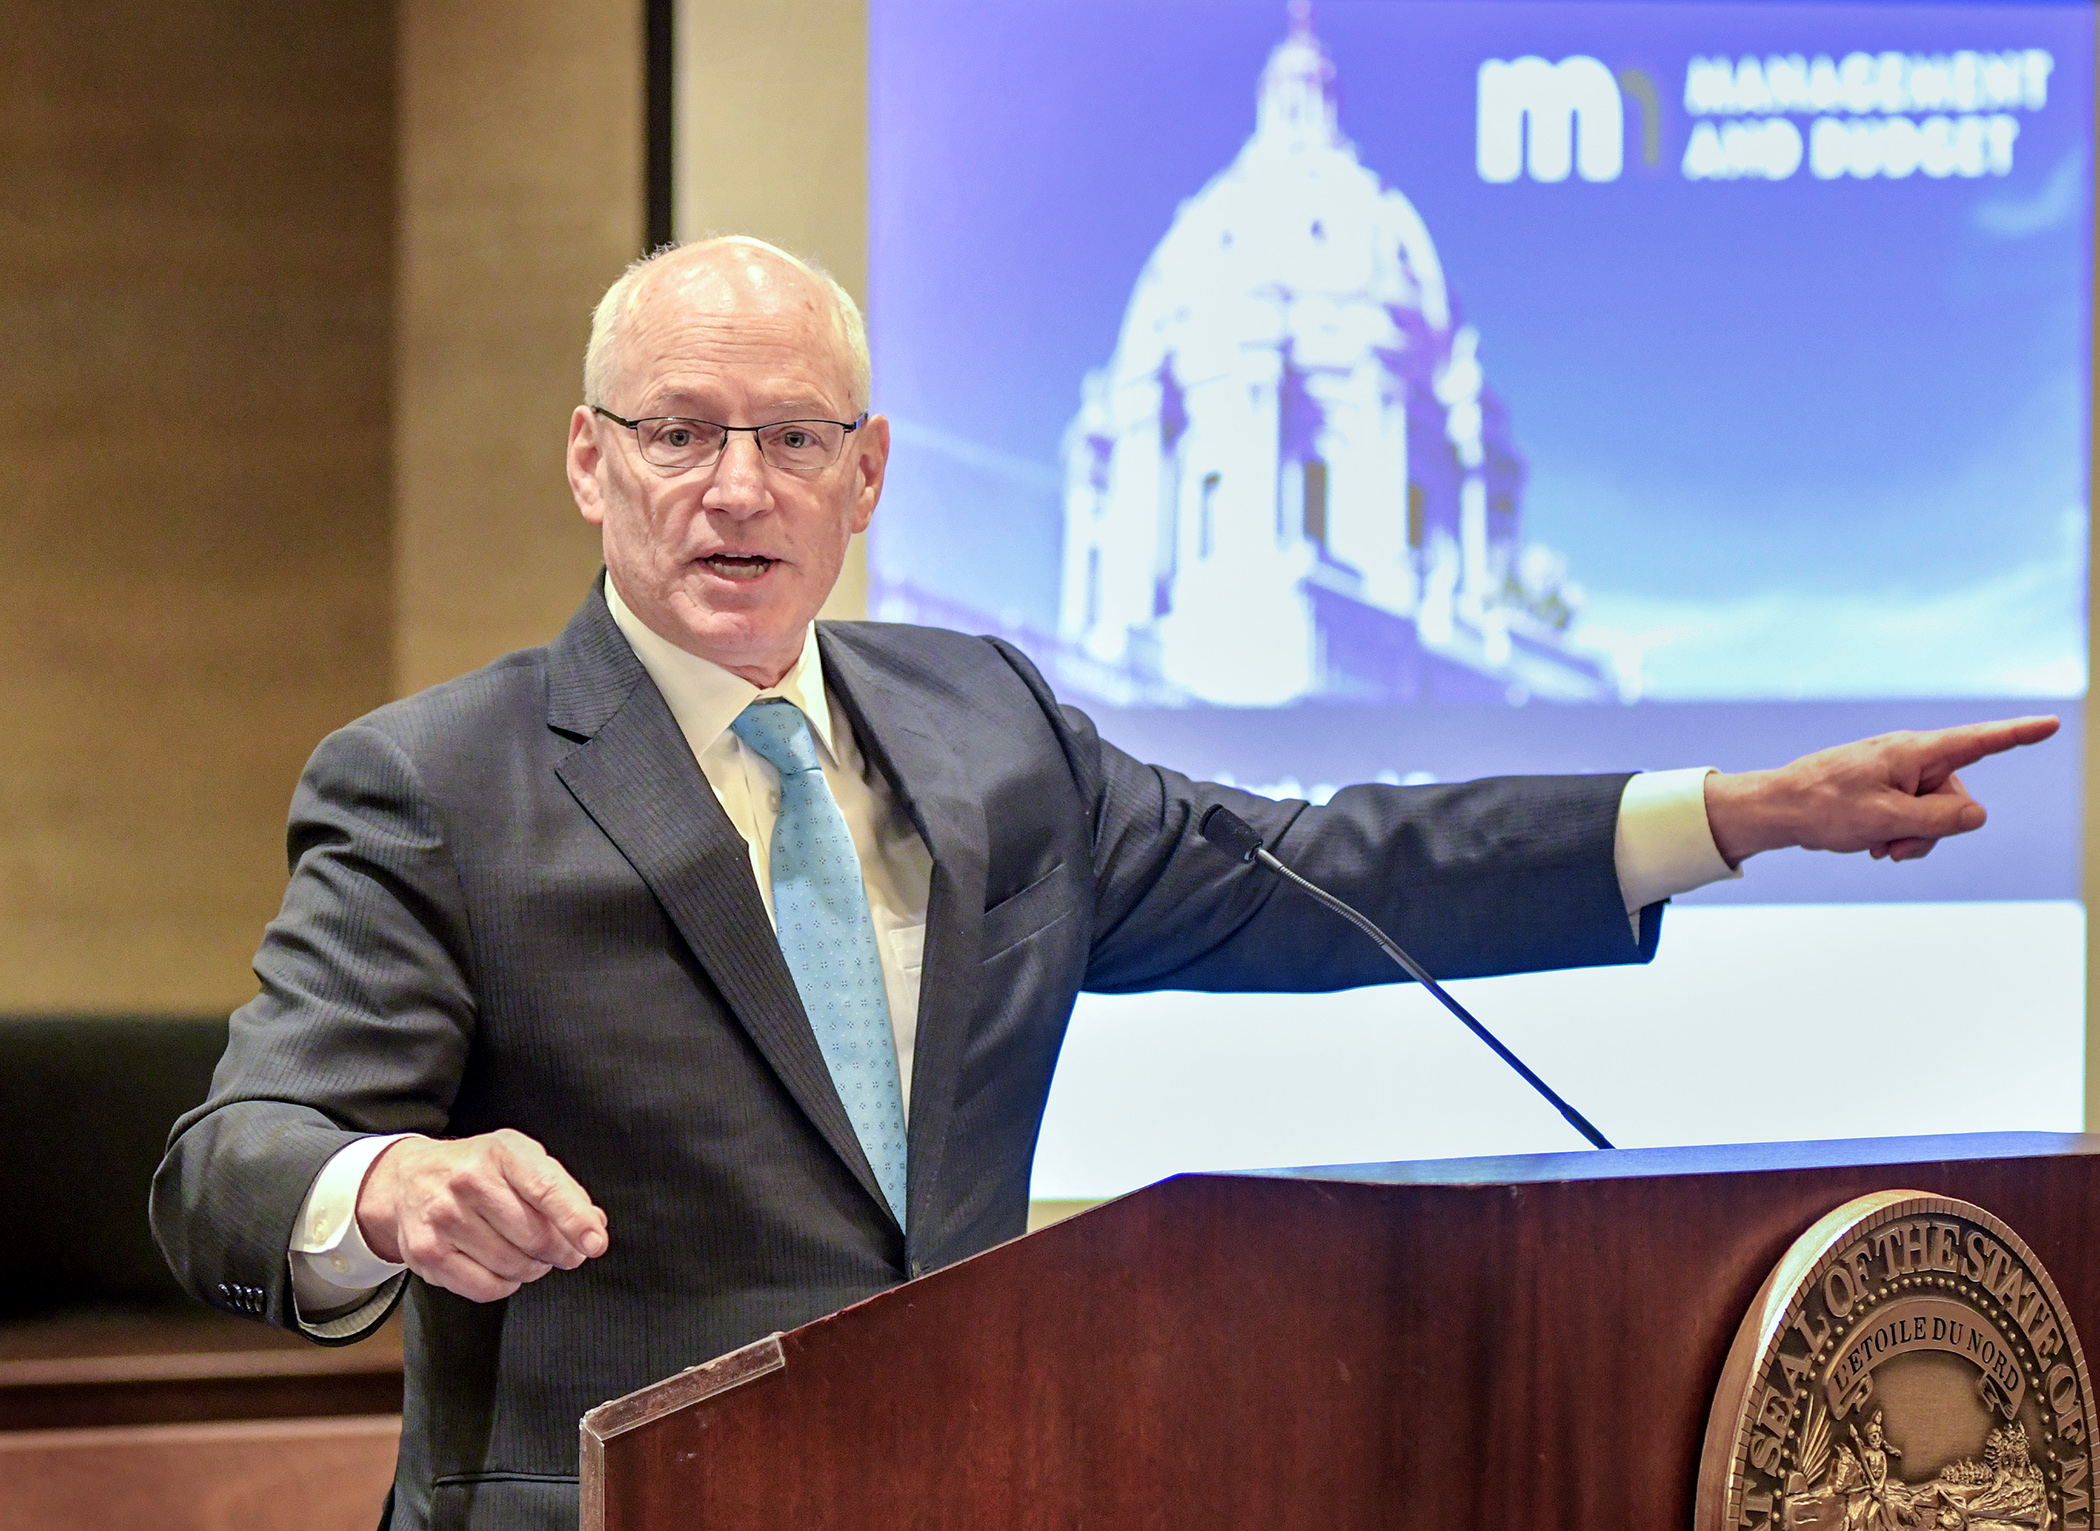 Minnesota Management and Budget Commissioner Myron Frans presents the 2017 November Budget and Economic Forecast Dec. 5. Photo by Andrew VonBank